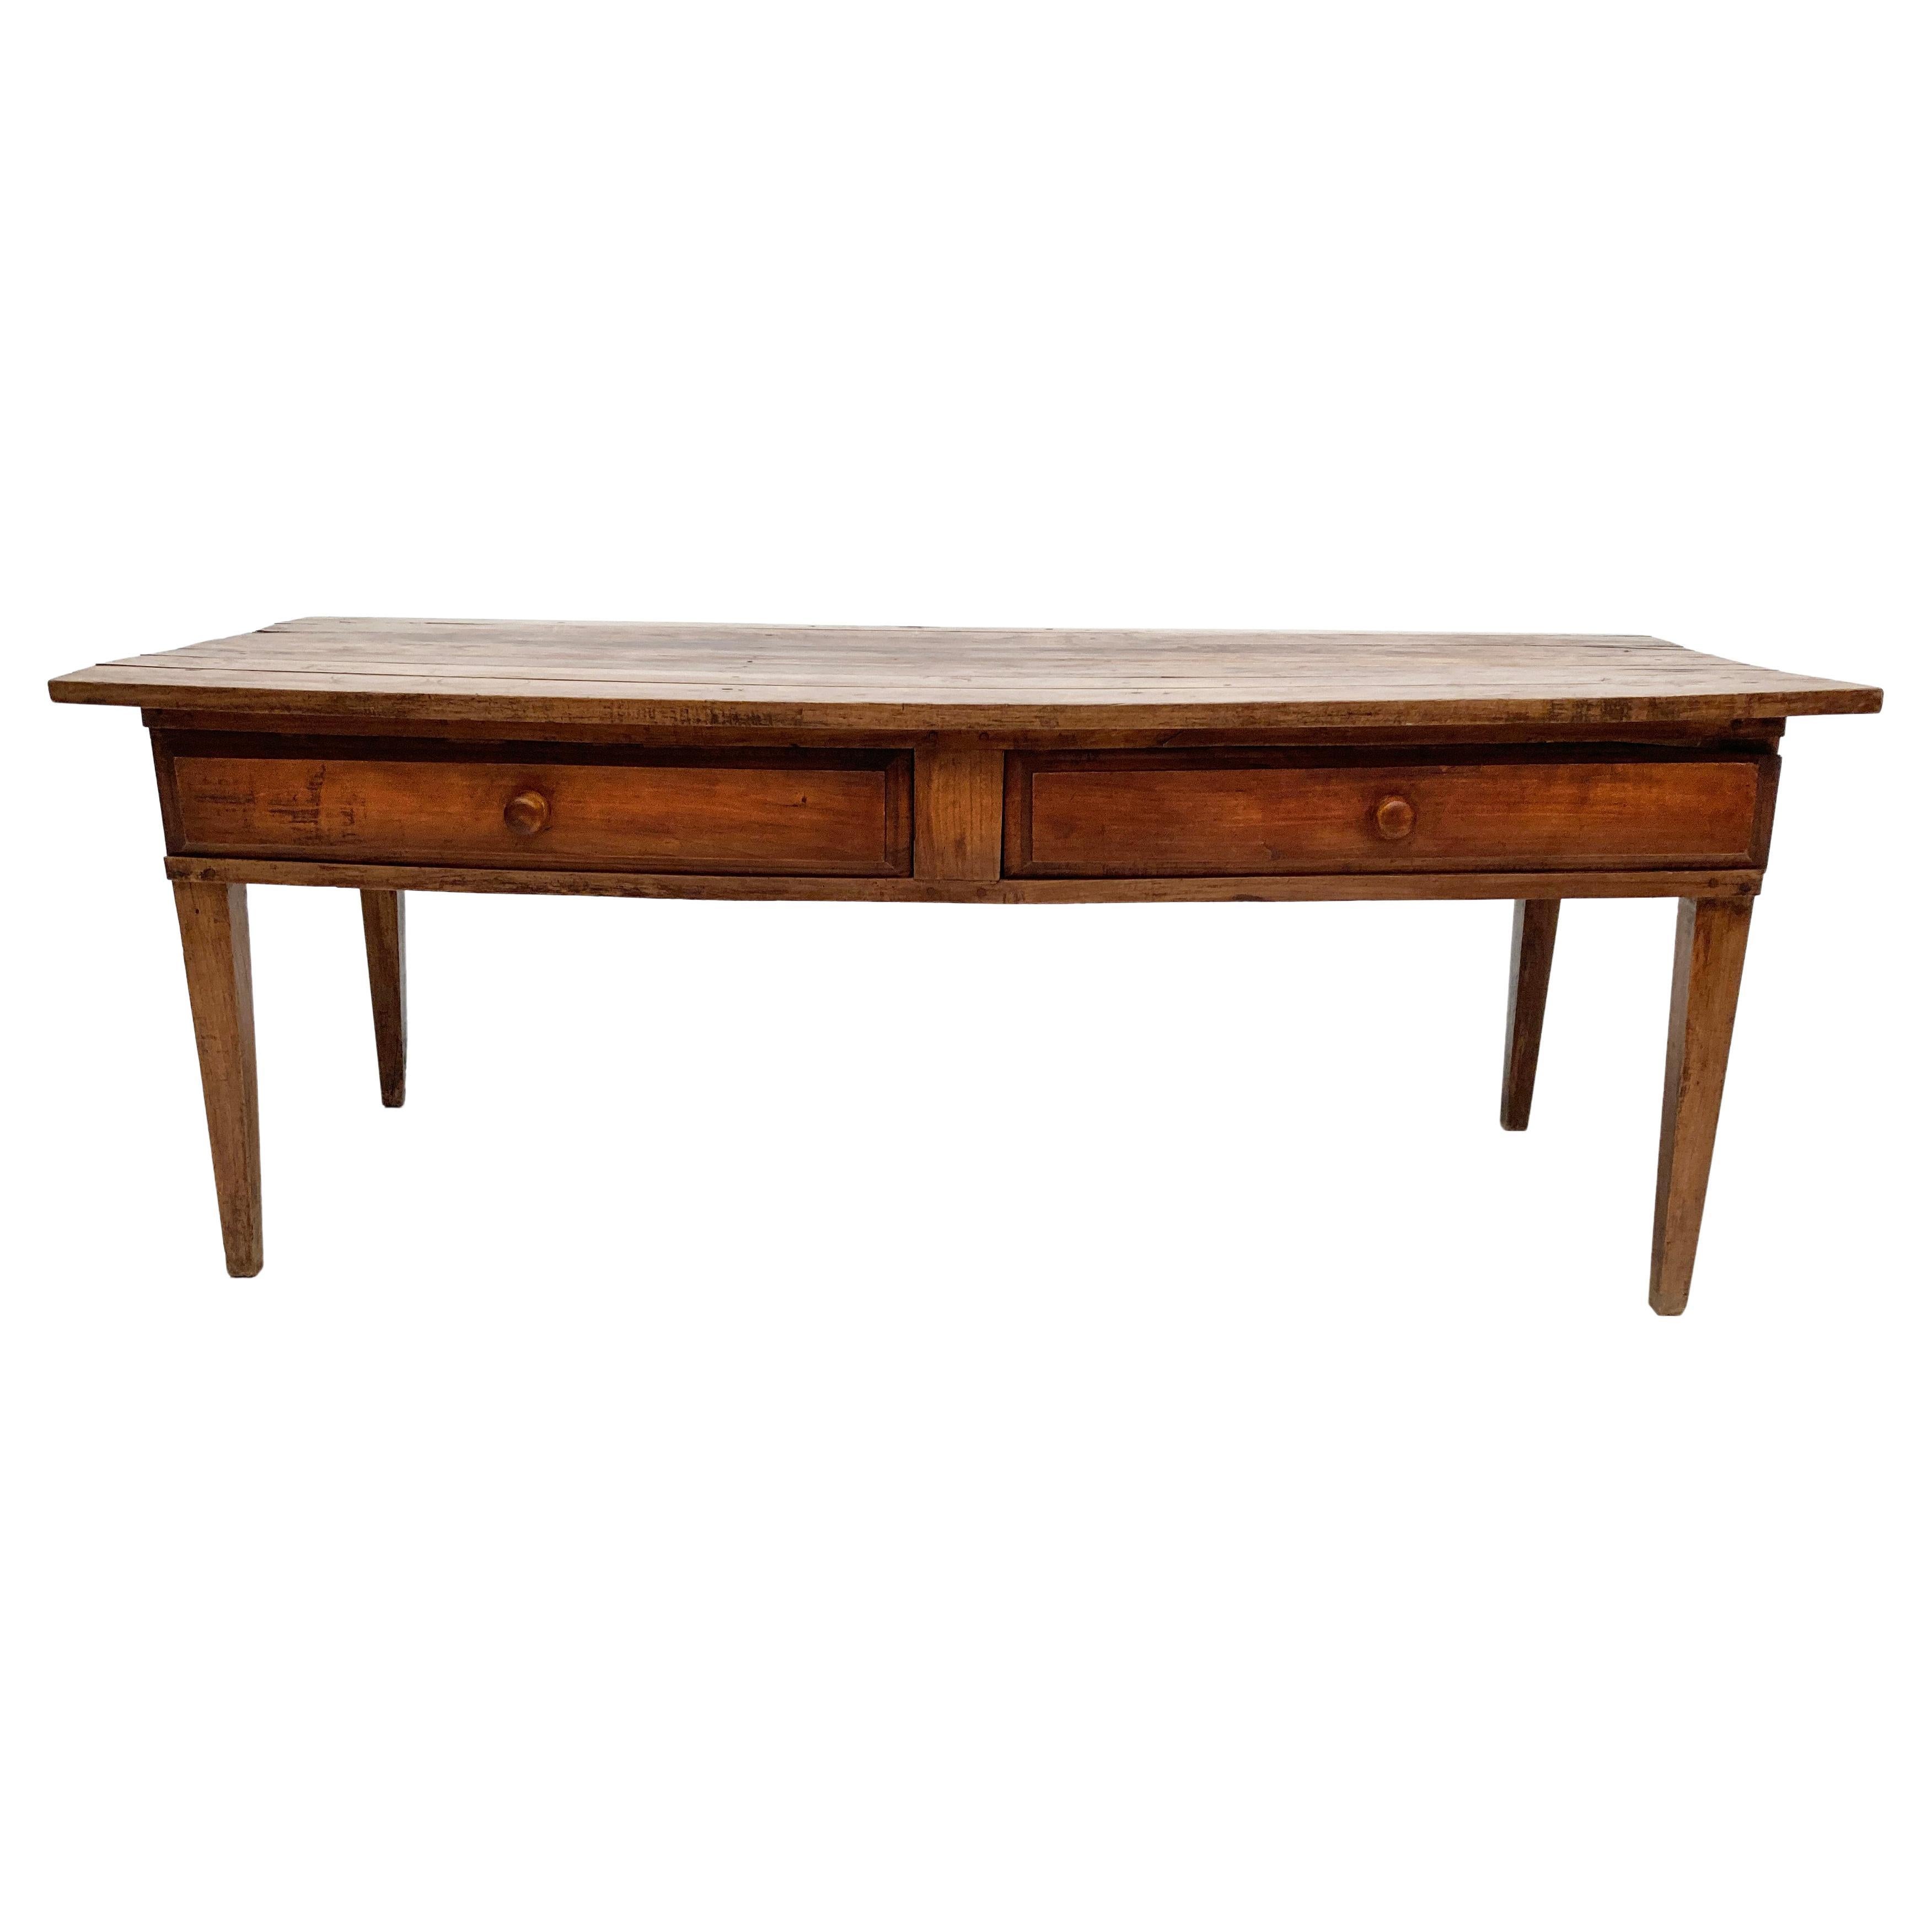 19th Century French Hand-crafted Pétrin Table  For Sale